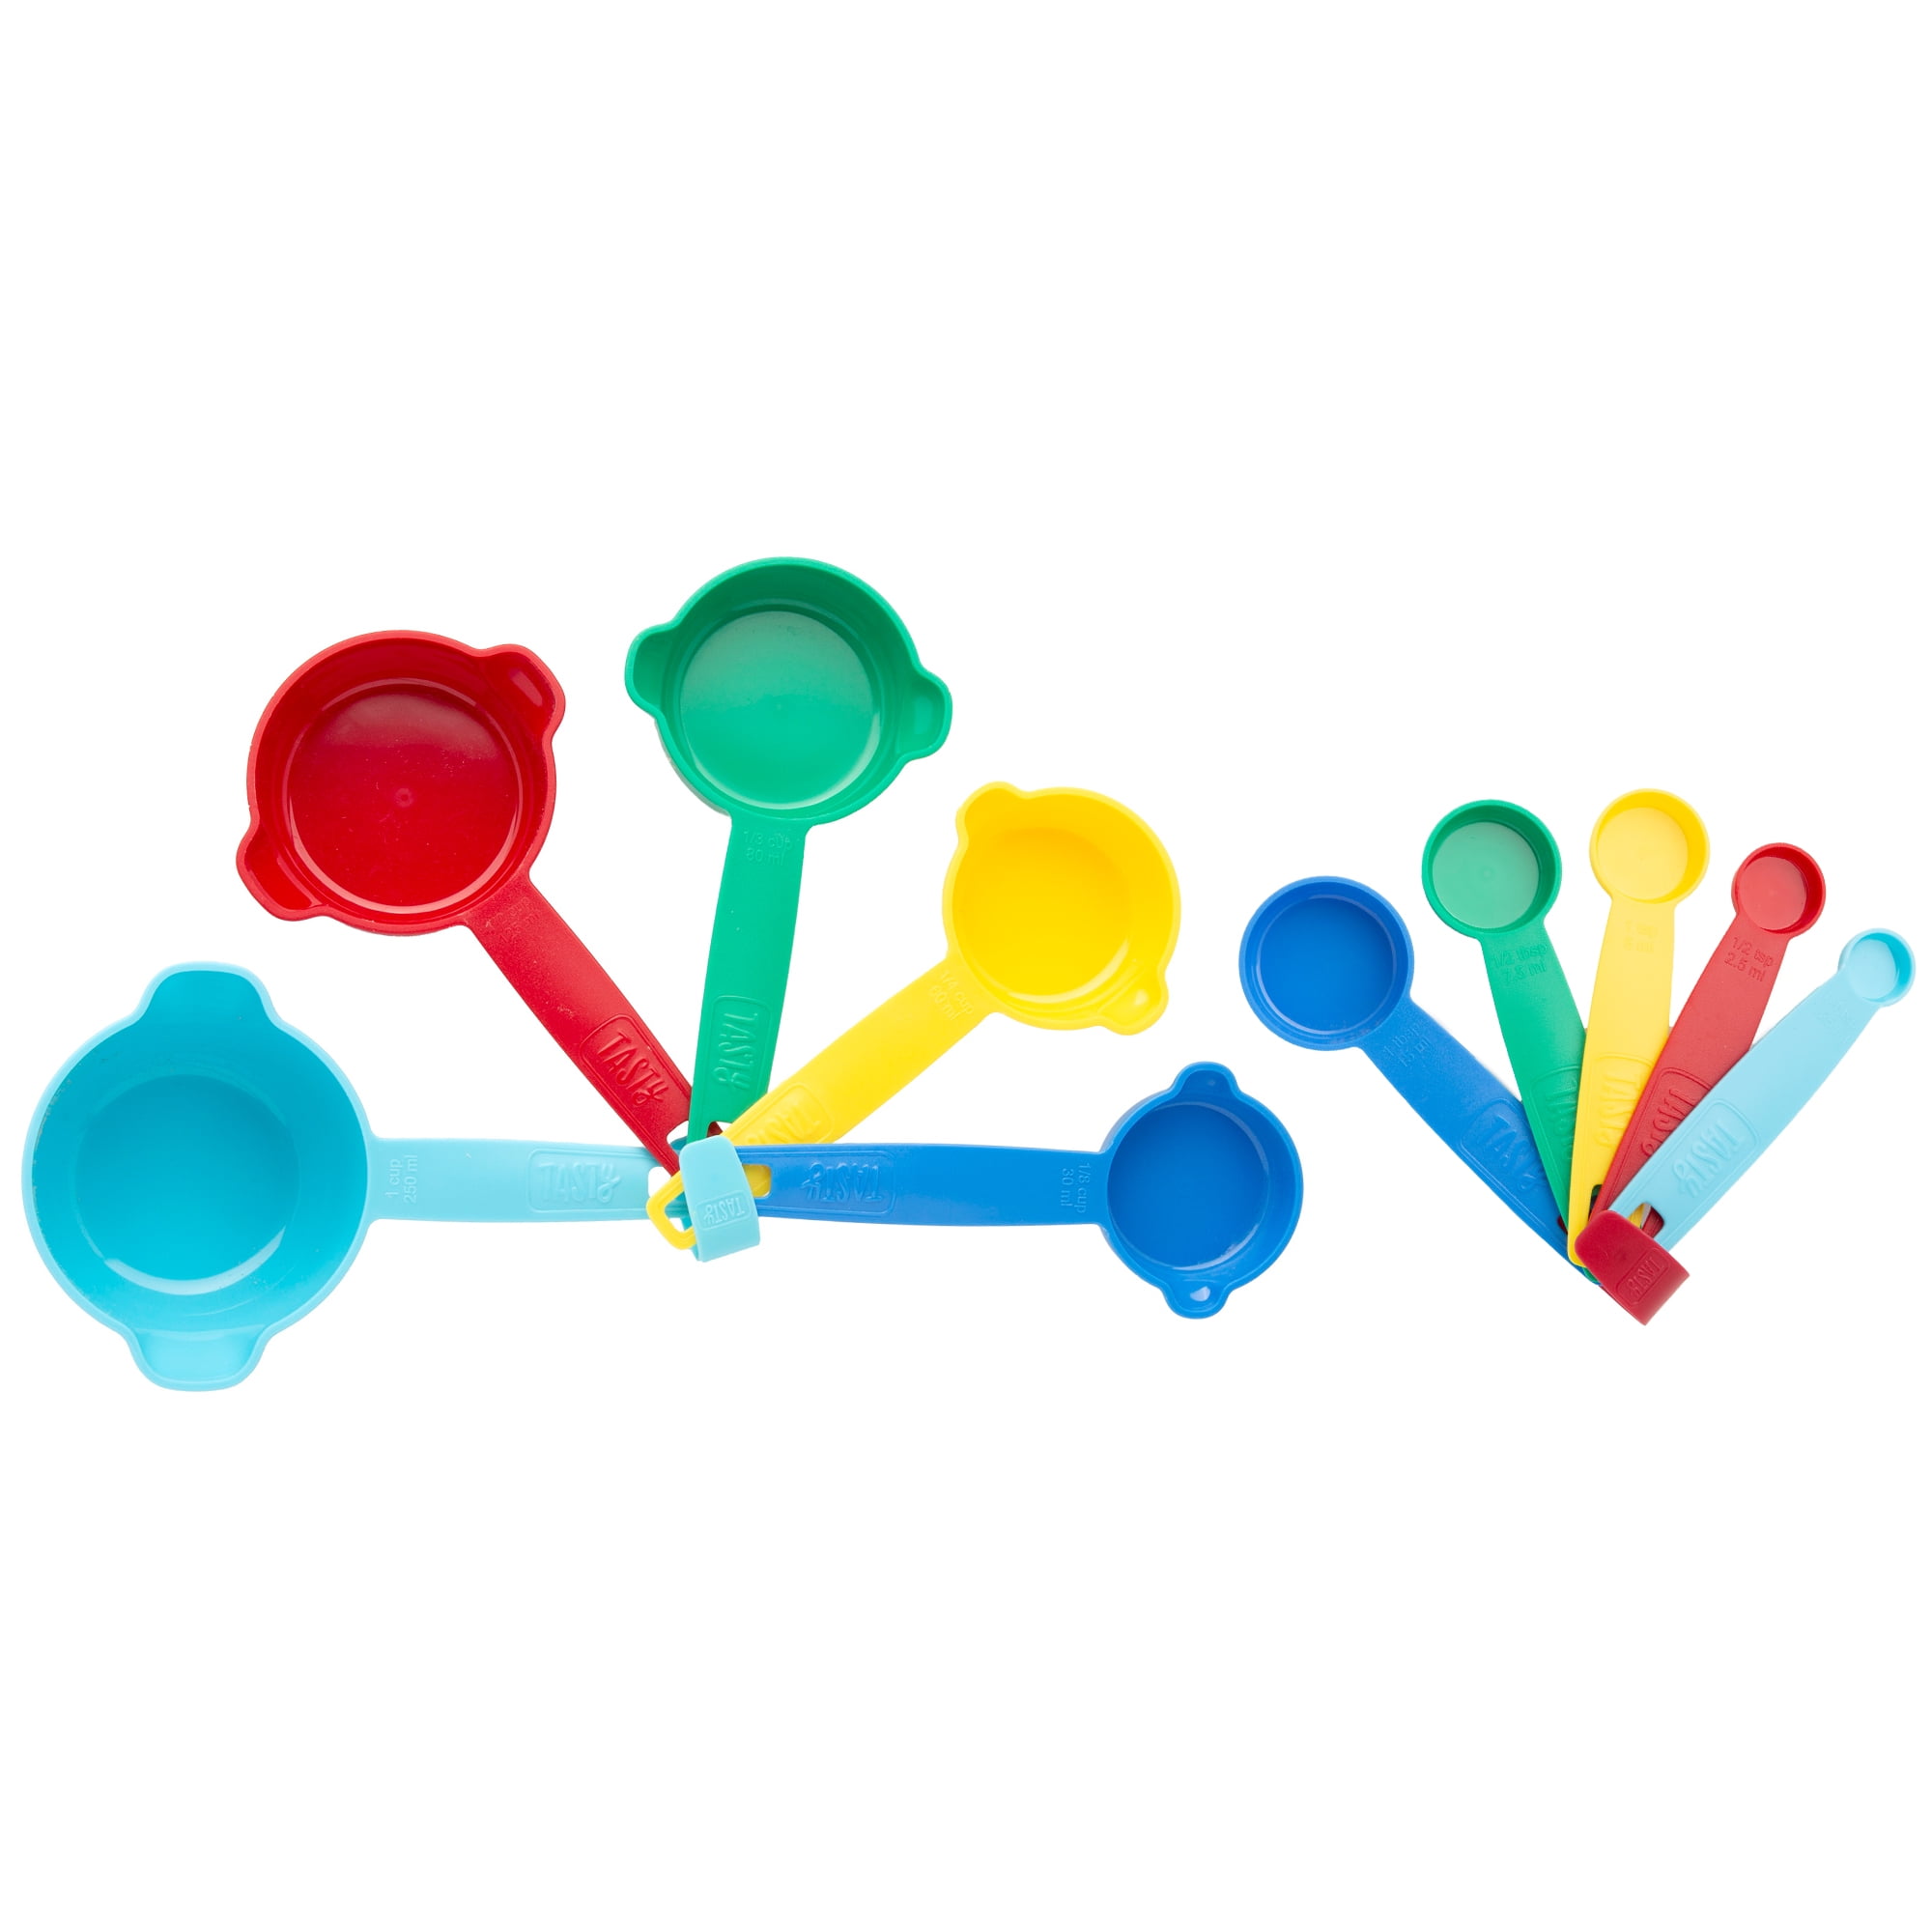 Plastic Measuring Cups and Spoons Set of 8 - Easy to Read Measuring Cups  Measuring Spoons with Large Print & Spout for Measuring Dry Liquid